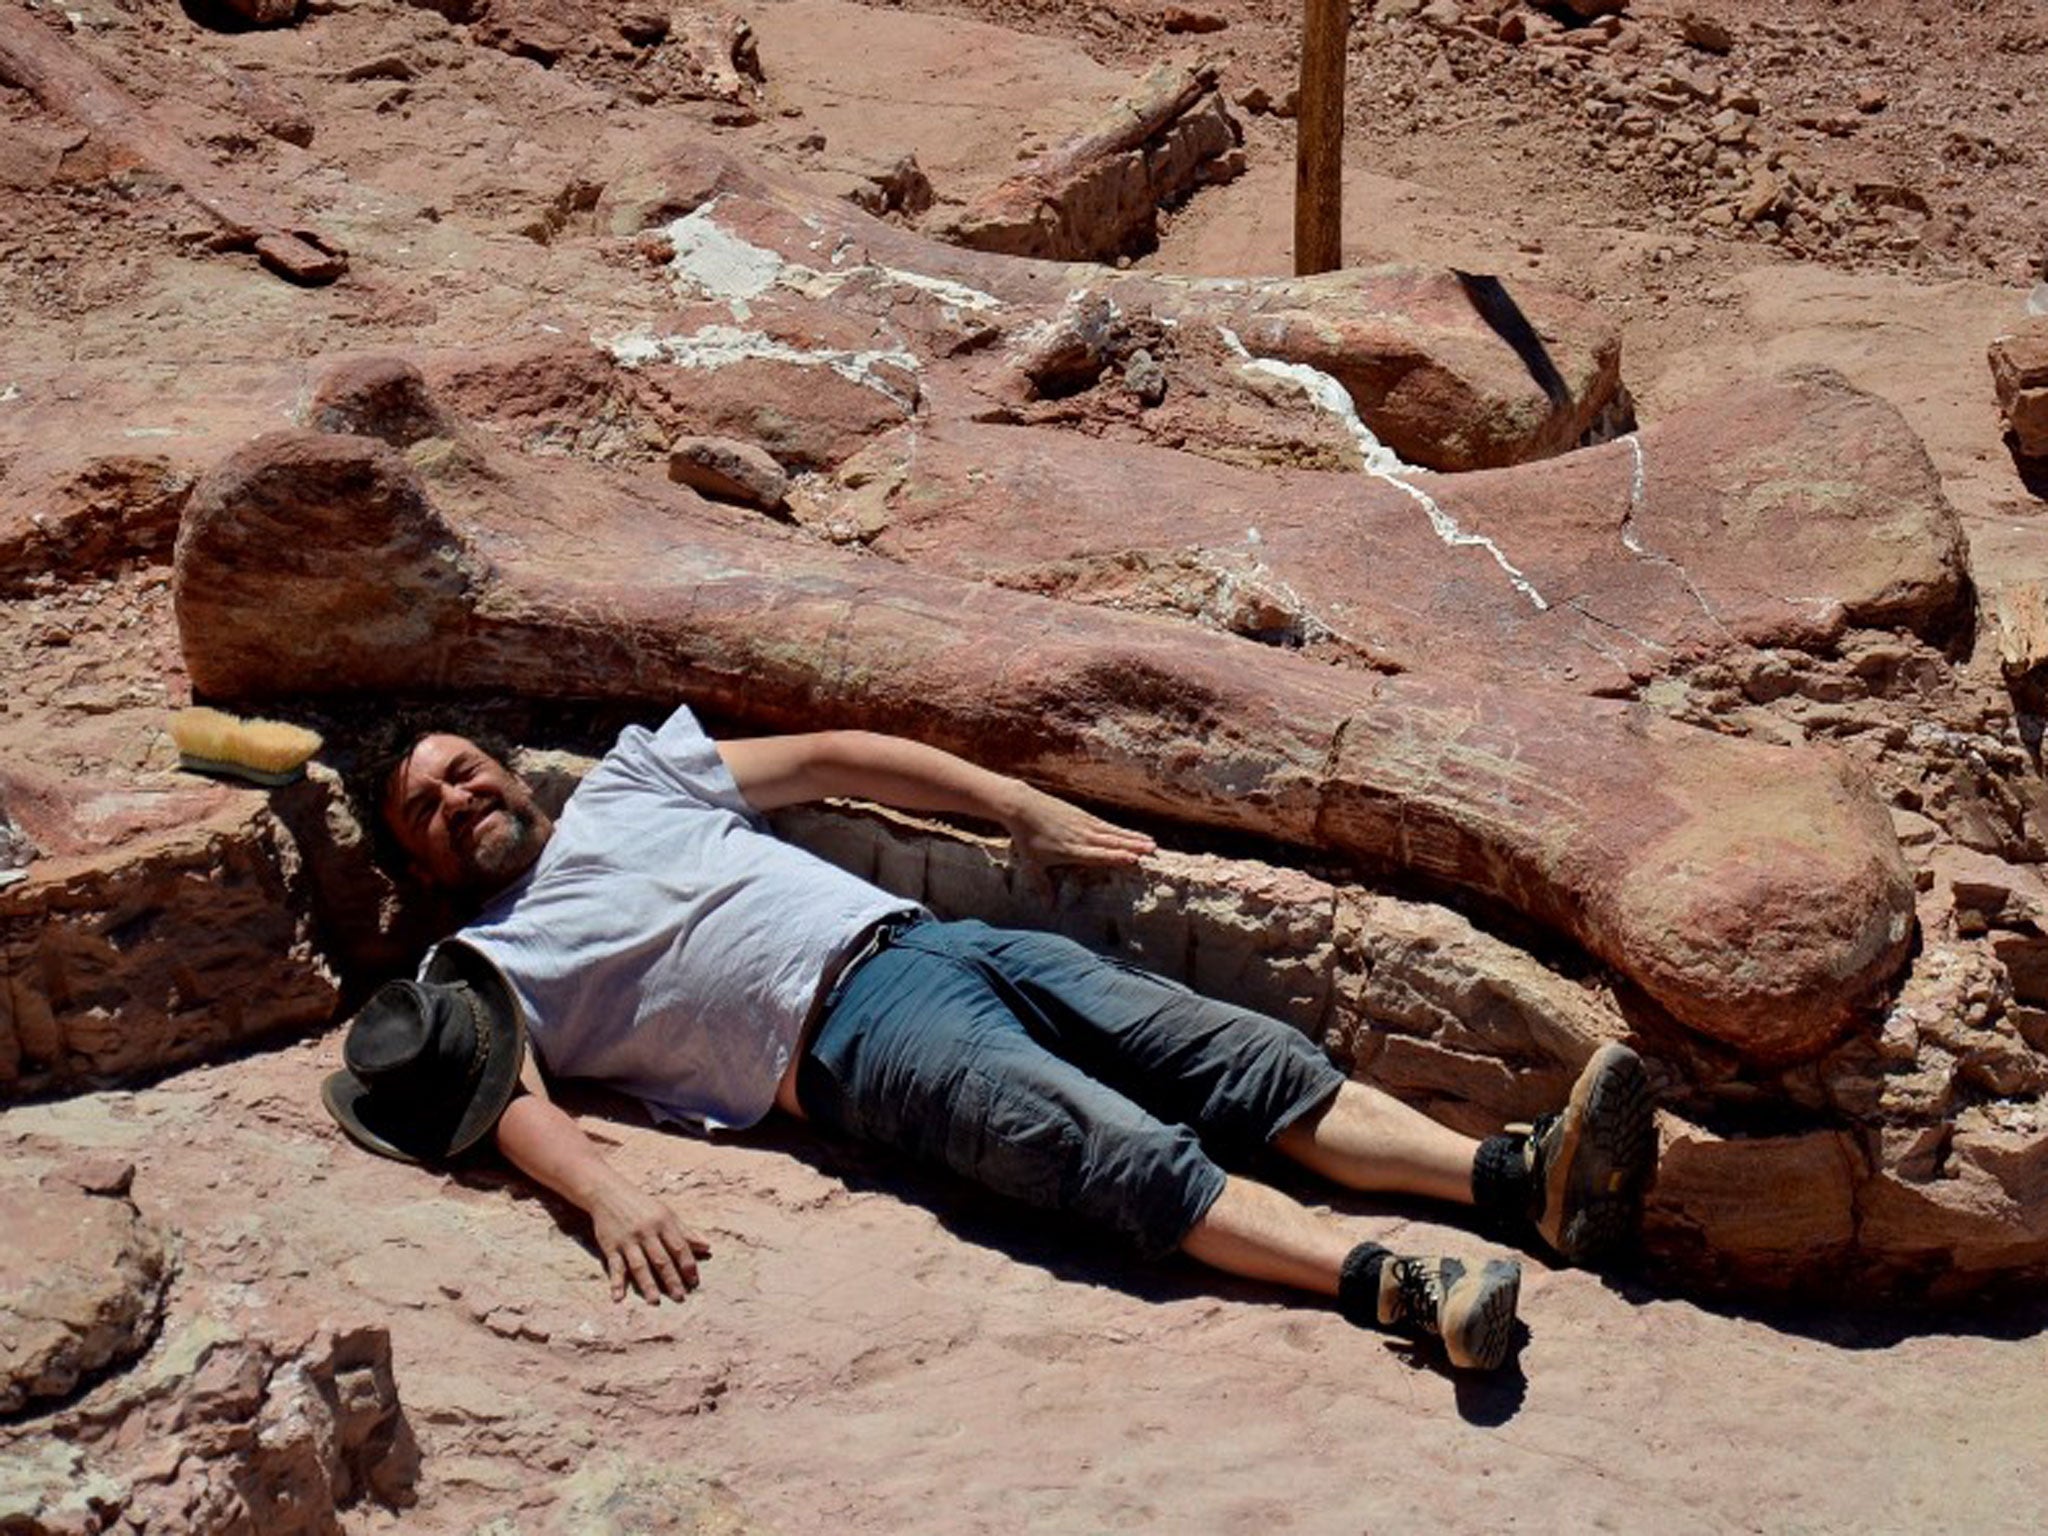 Dr Diego Pol gives a hint of the scale of the dinosaur’s size as he stretches out alongside one of the bones discovered in Patagonia